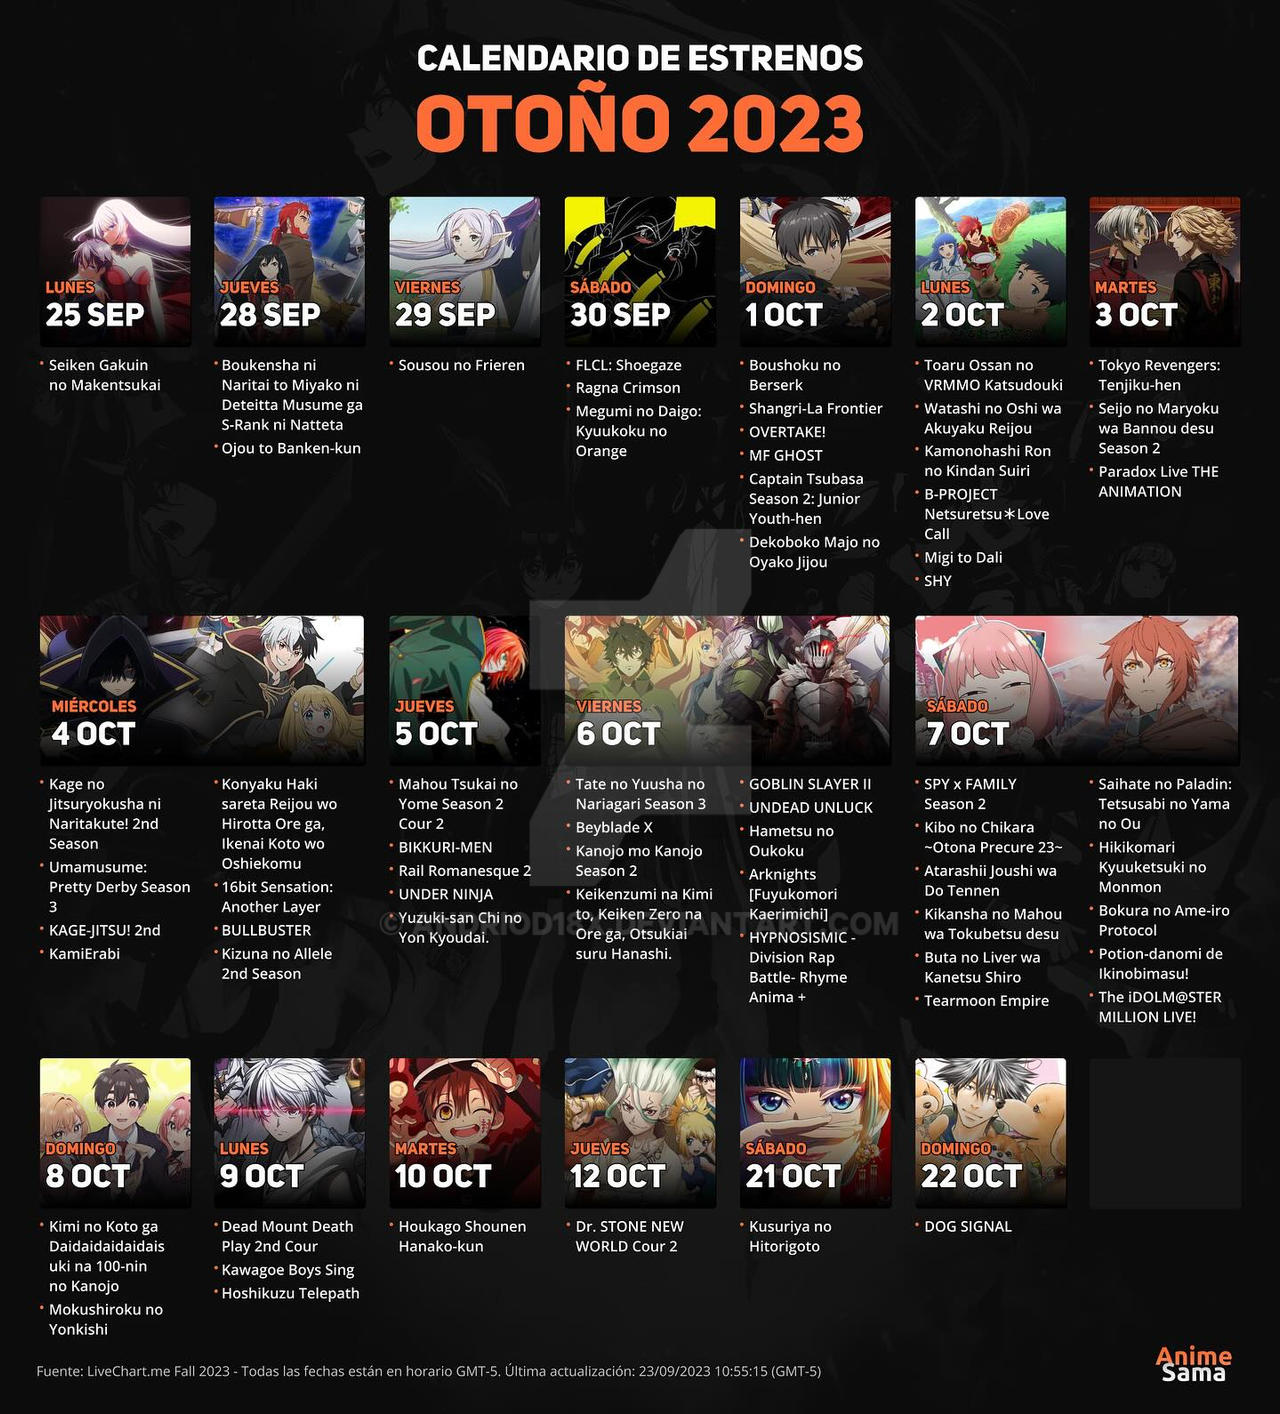 anime October 2023: name of the series by Andriod18X on DeviantArt